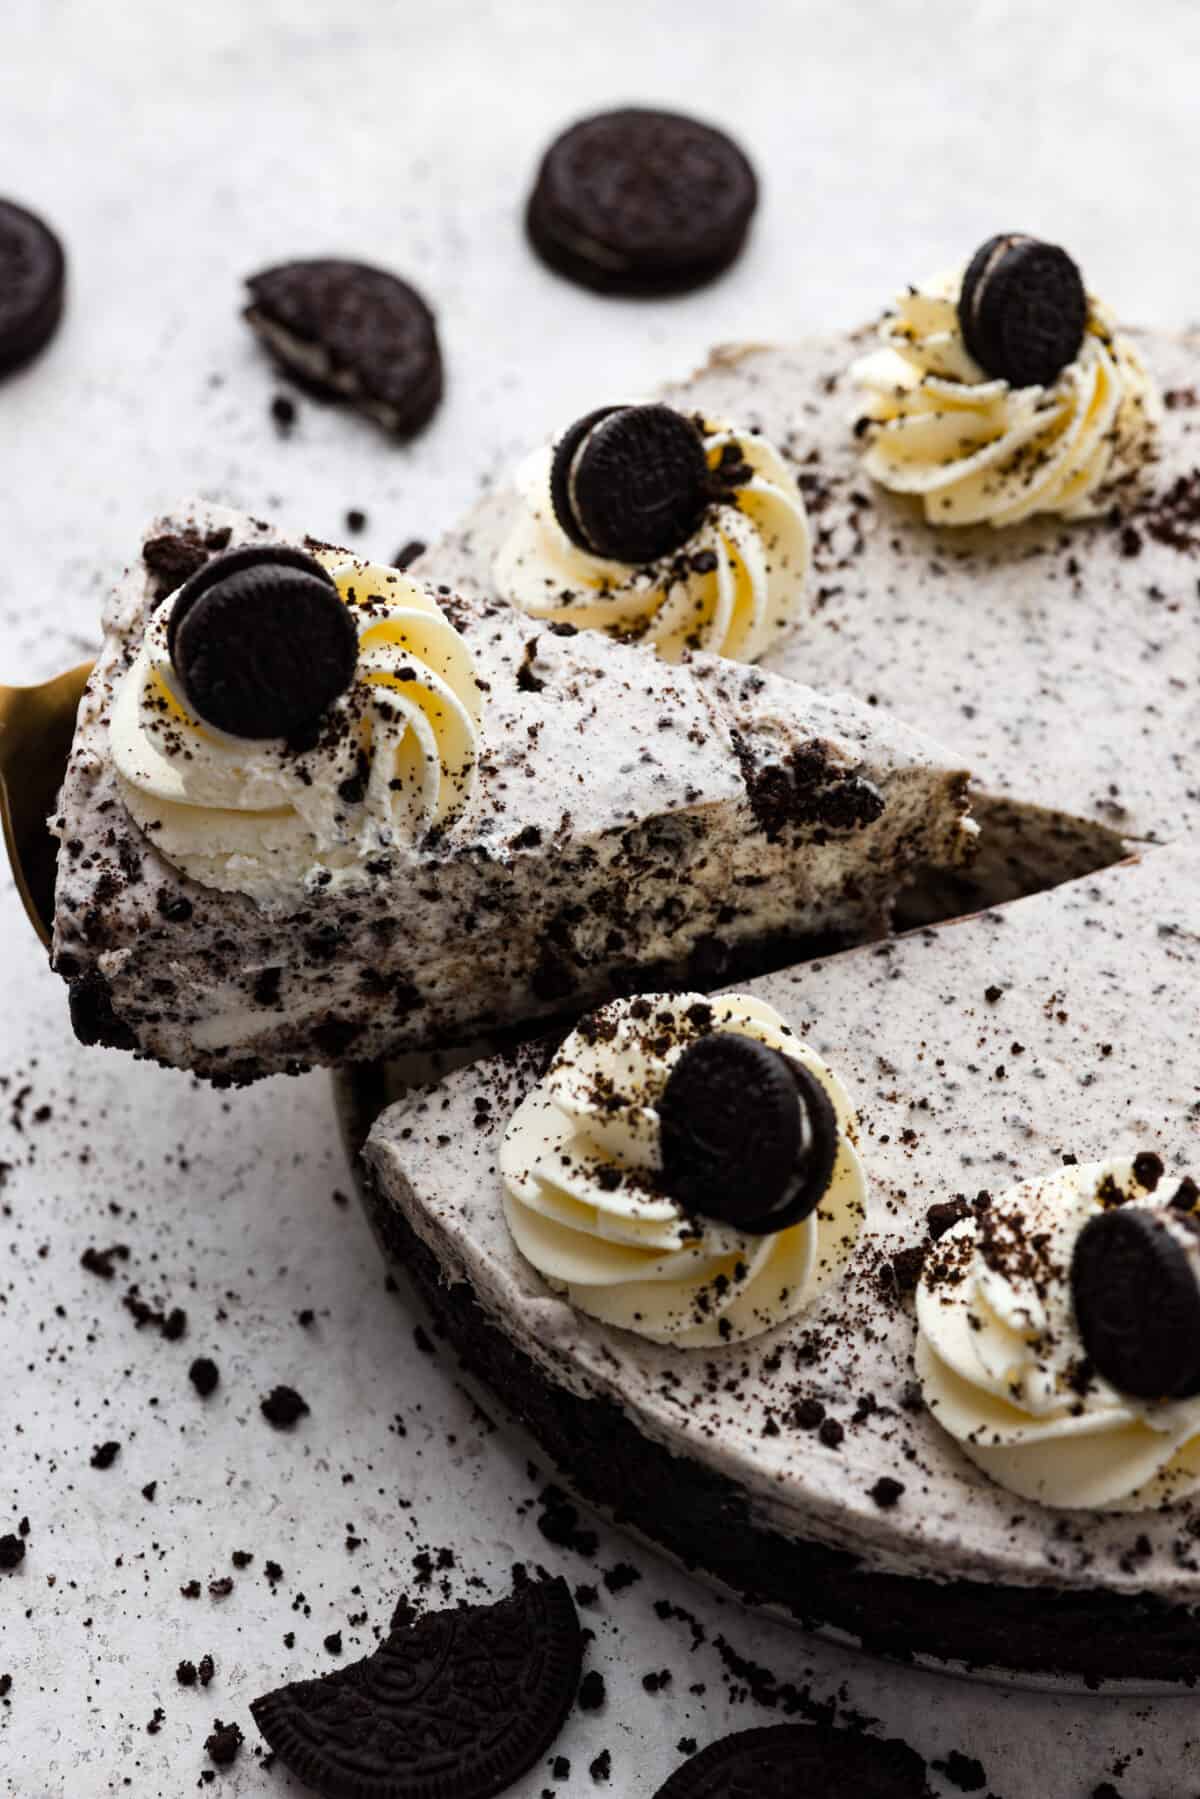 One slice cut out of a whole no bake Oreo cheesecake.